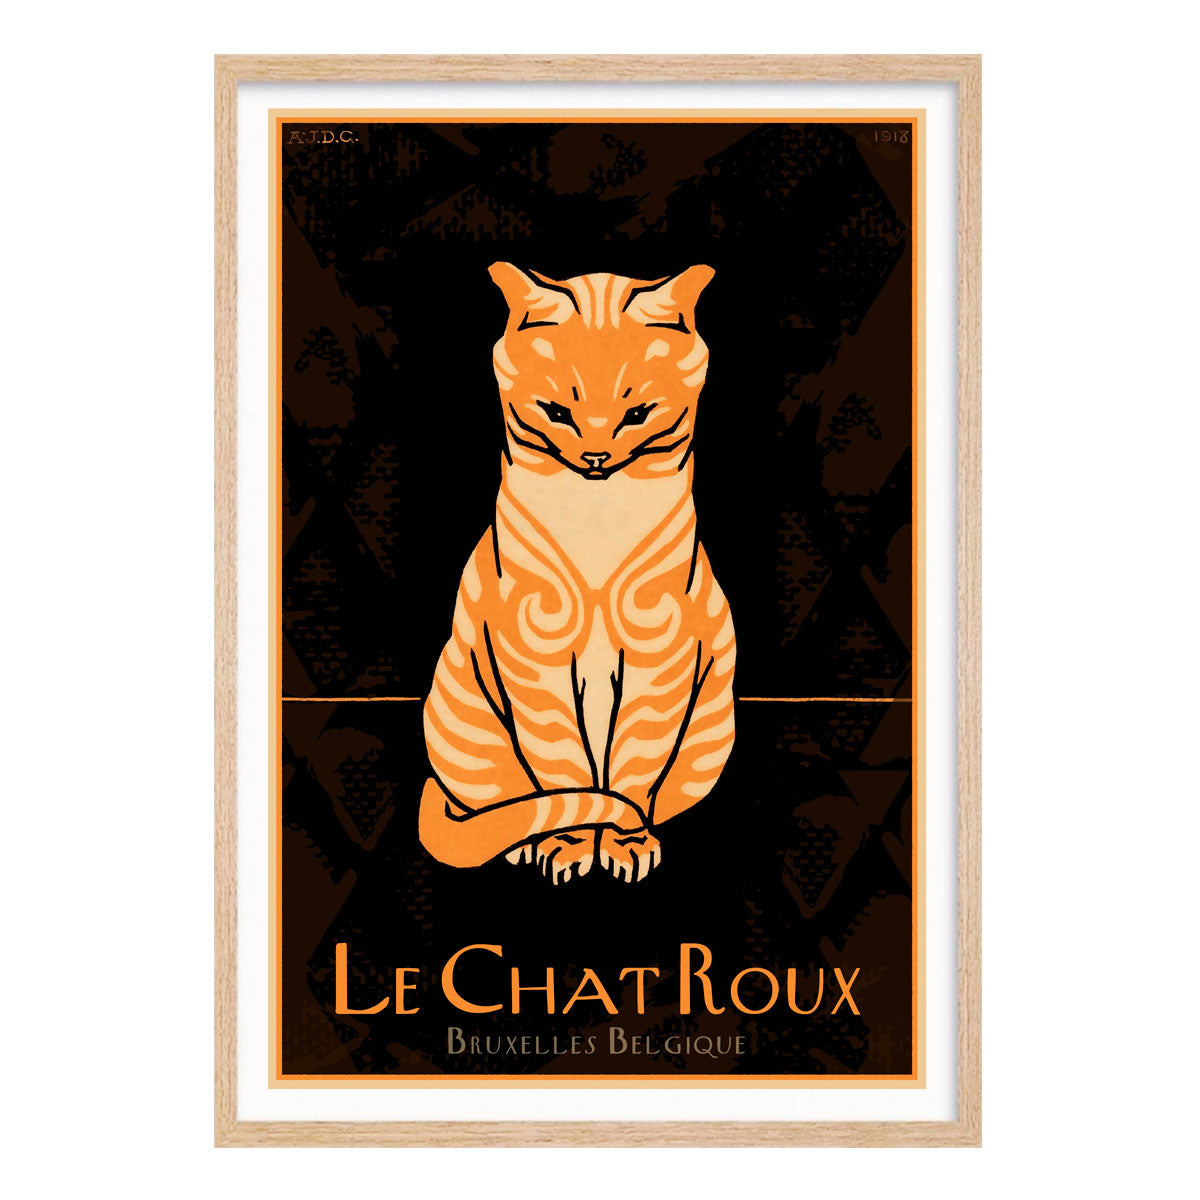 Le Chat Roux vintage retro poster print in oak frame from Places We Luv